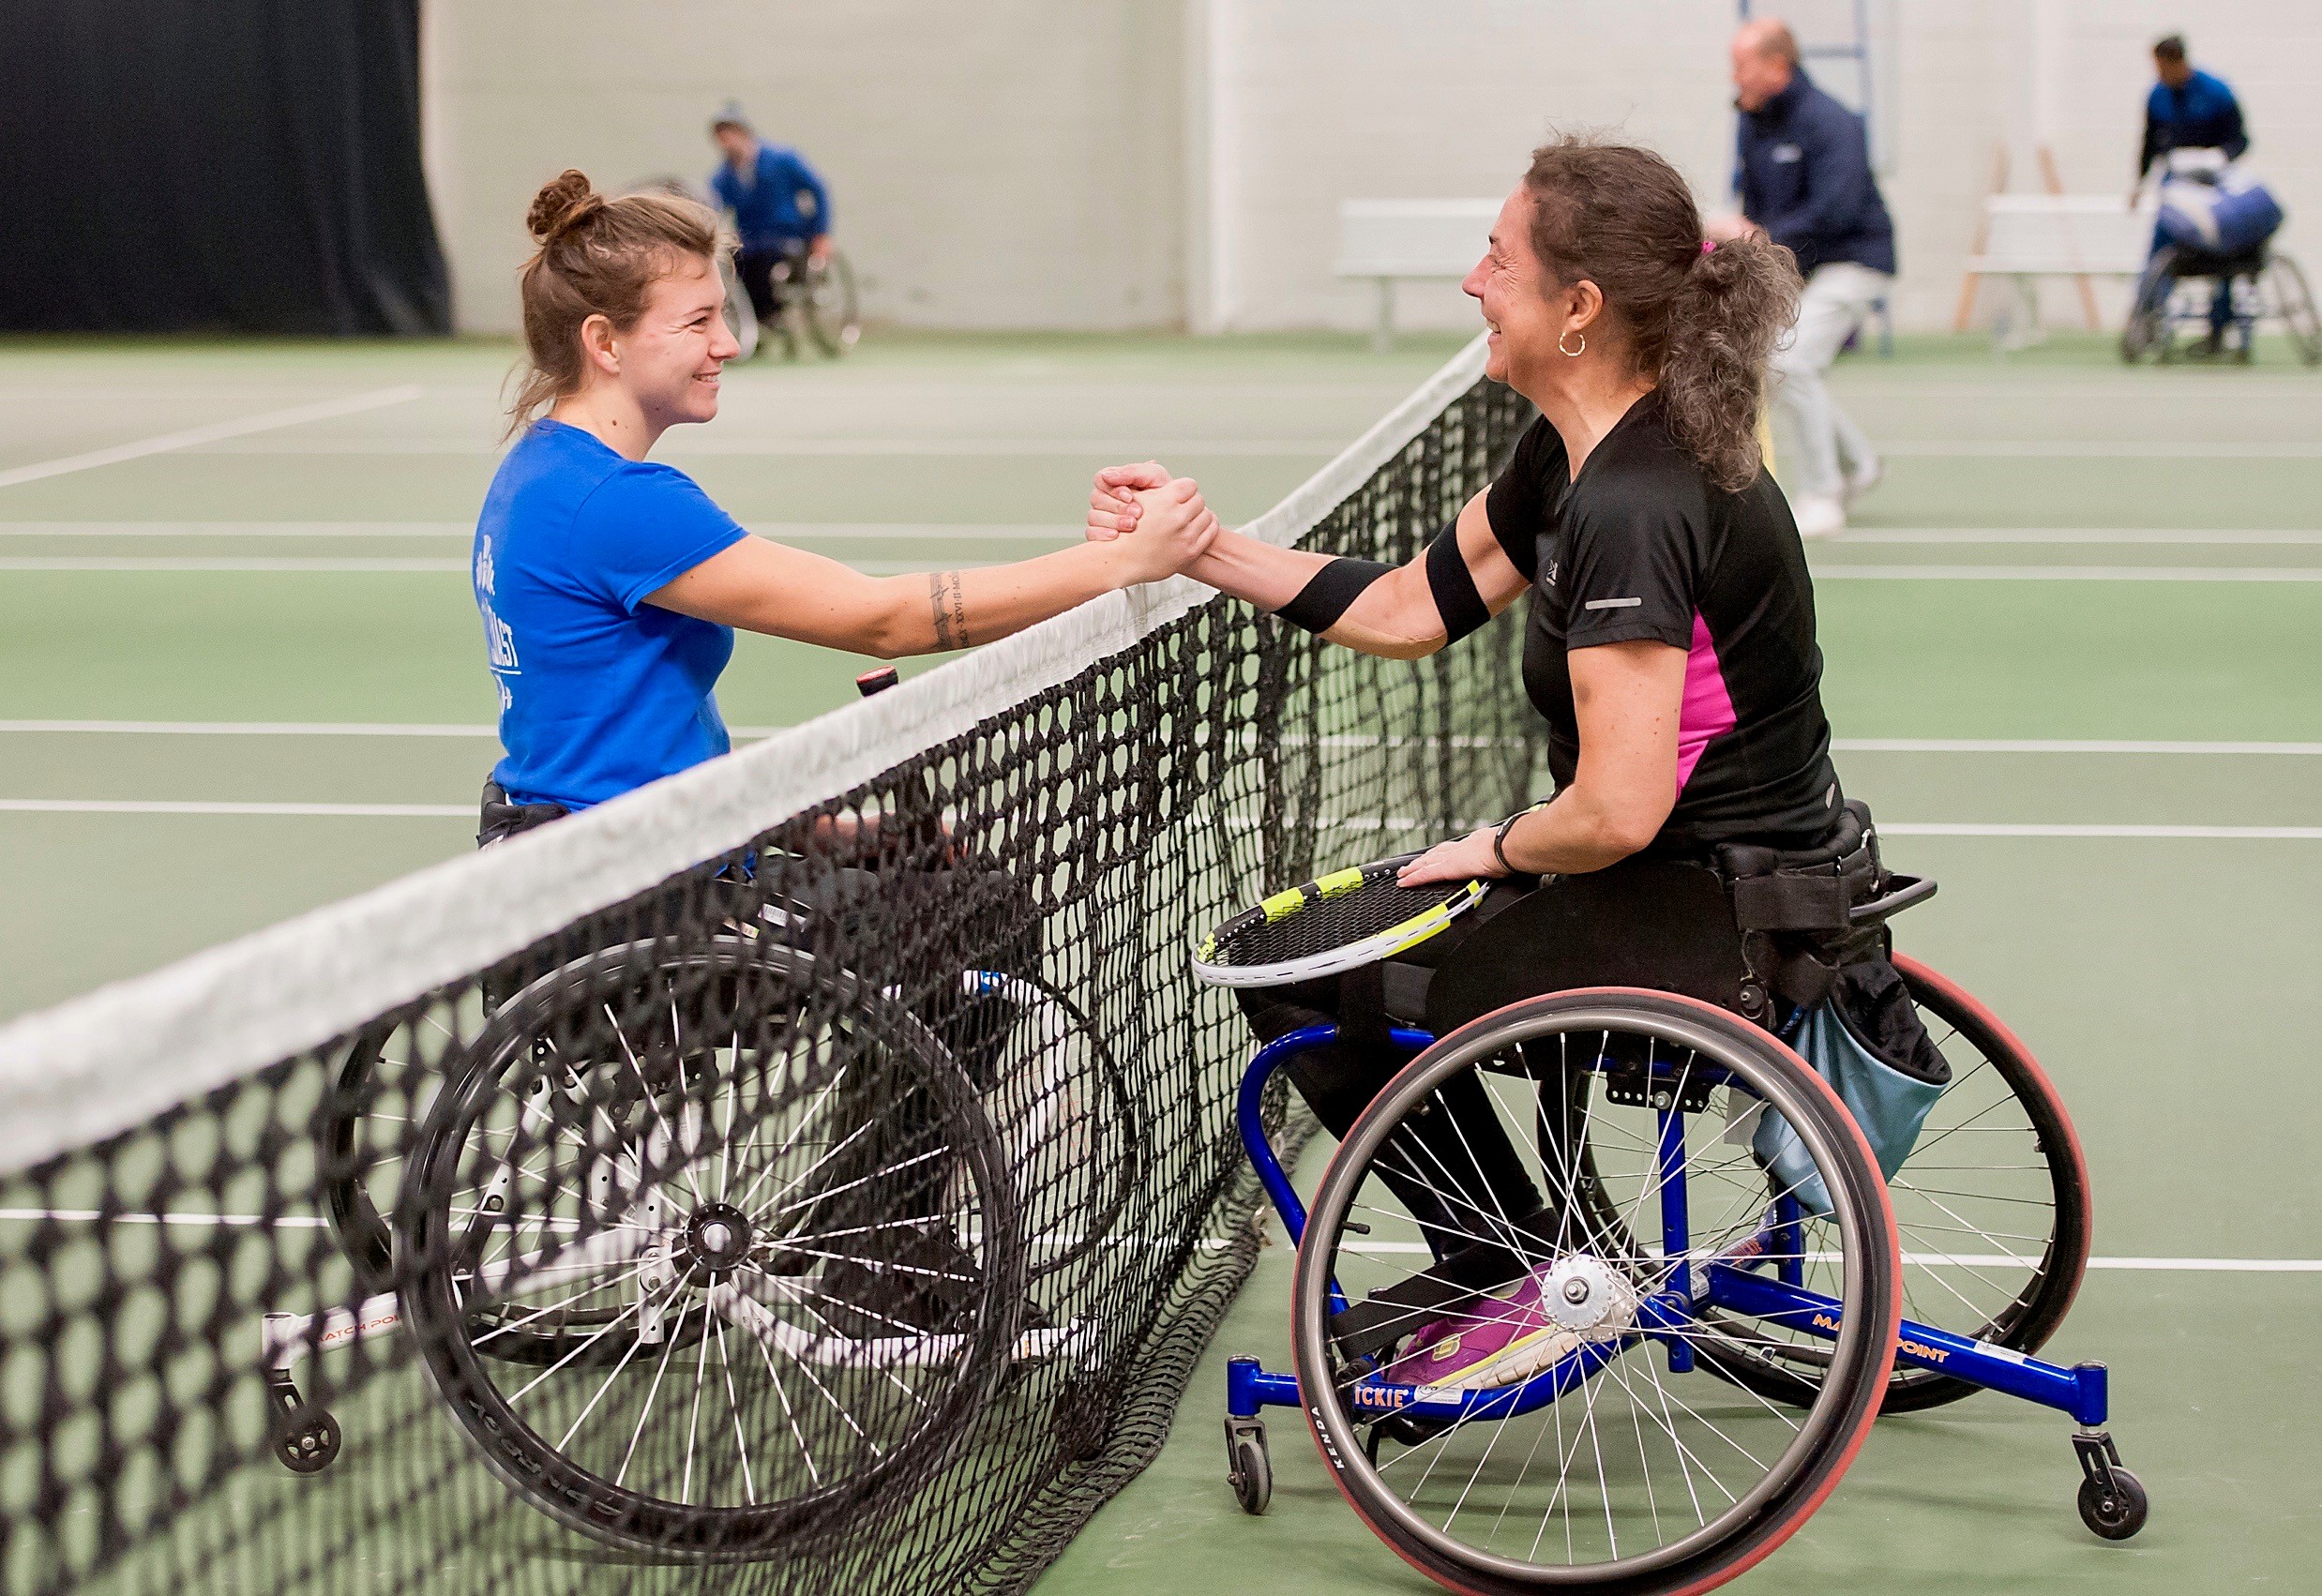 Lauren Jones, left, who made it a hat-trick of national women’s singles titles, is congratulated by local player Deena Webster after completing one of her victories at The Shrewsbury Club last weekend. Photo: Richard Dawson Photography